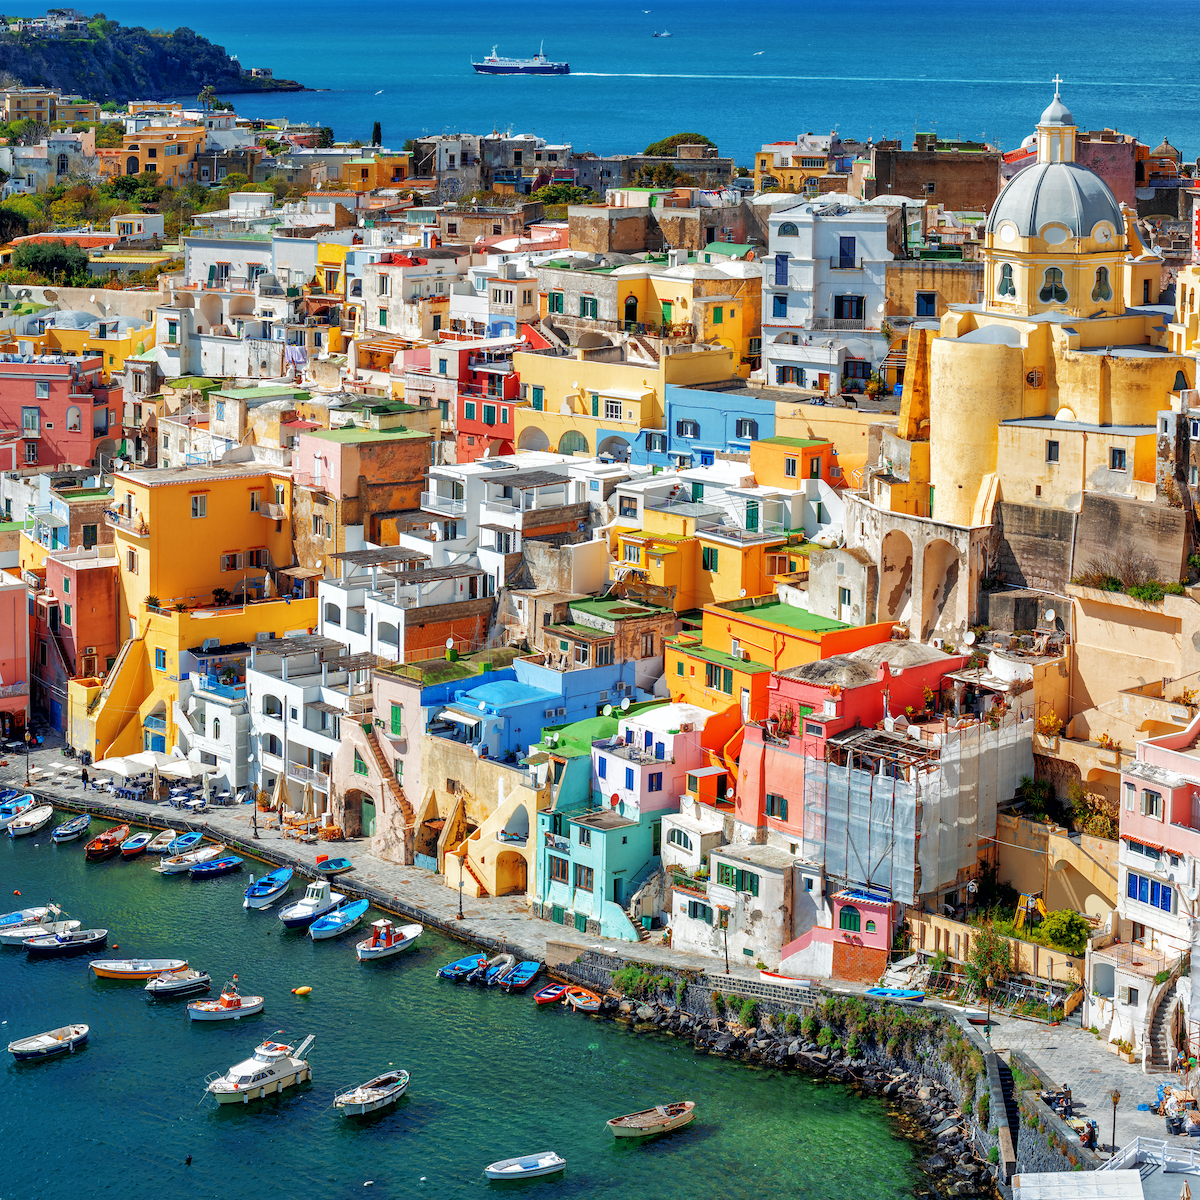 The colorful skyline of Procida, Italy